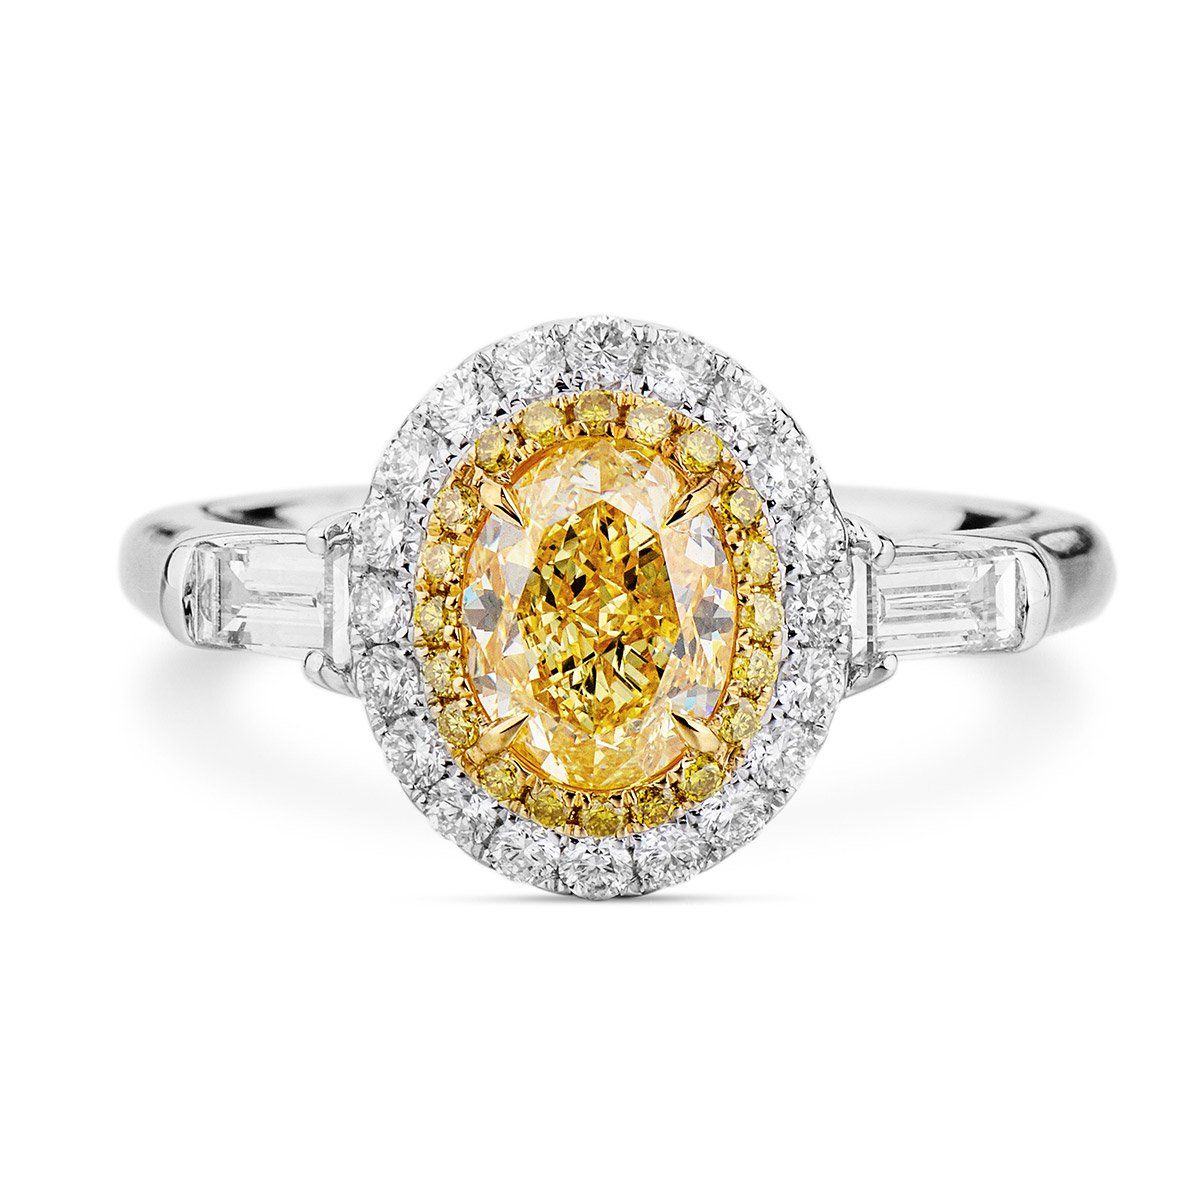 Fancy Yellow Diamond Ring, 1.04 Ct. (1.71 Ct. TW), Oval shape, GIA Certified, 2165820692